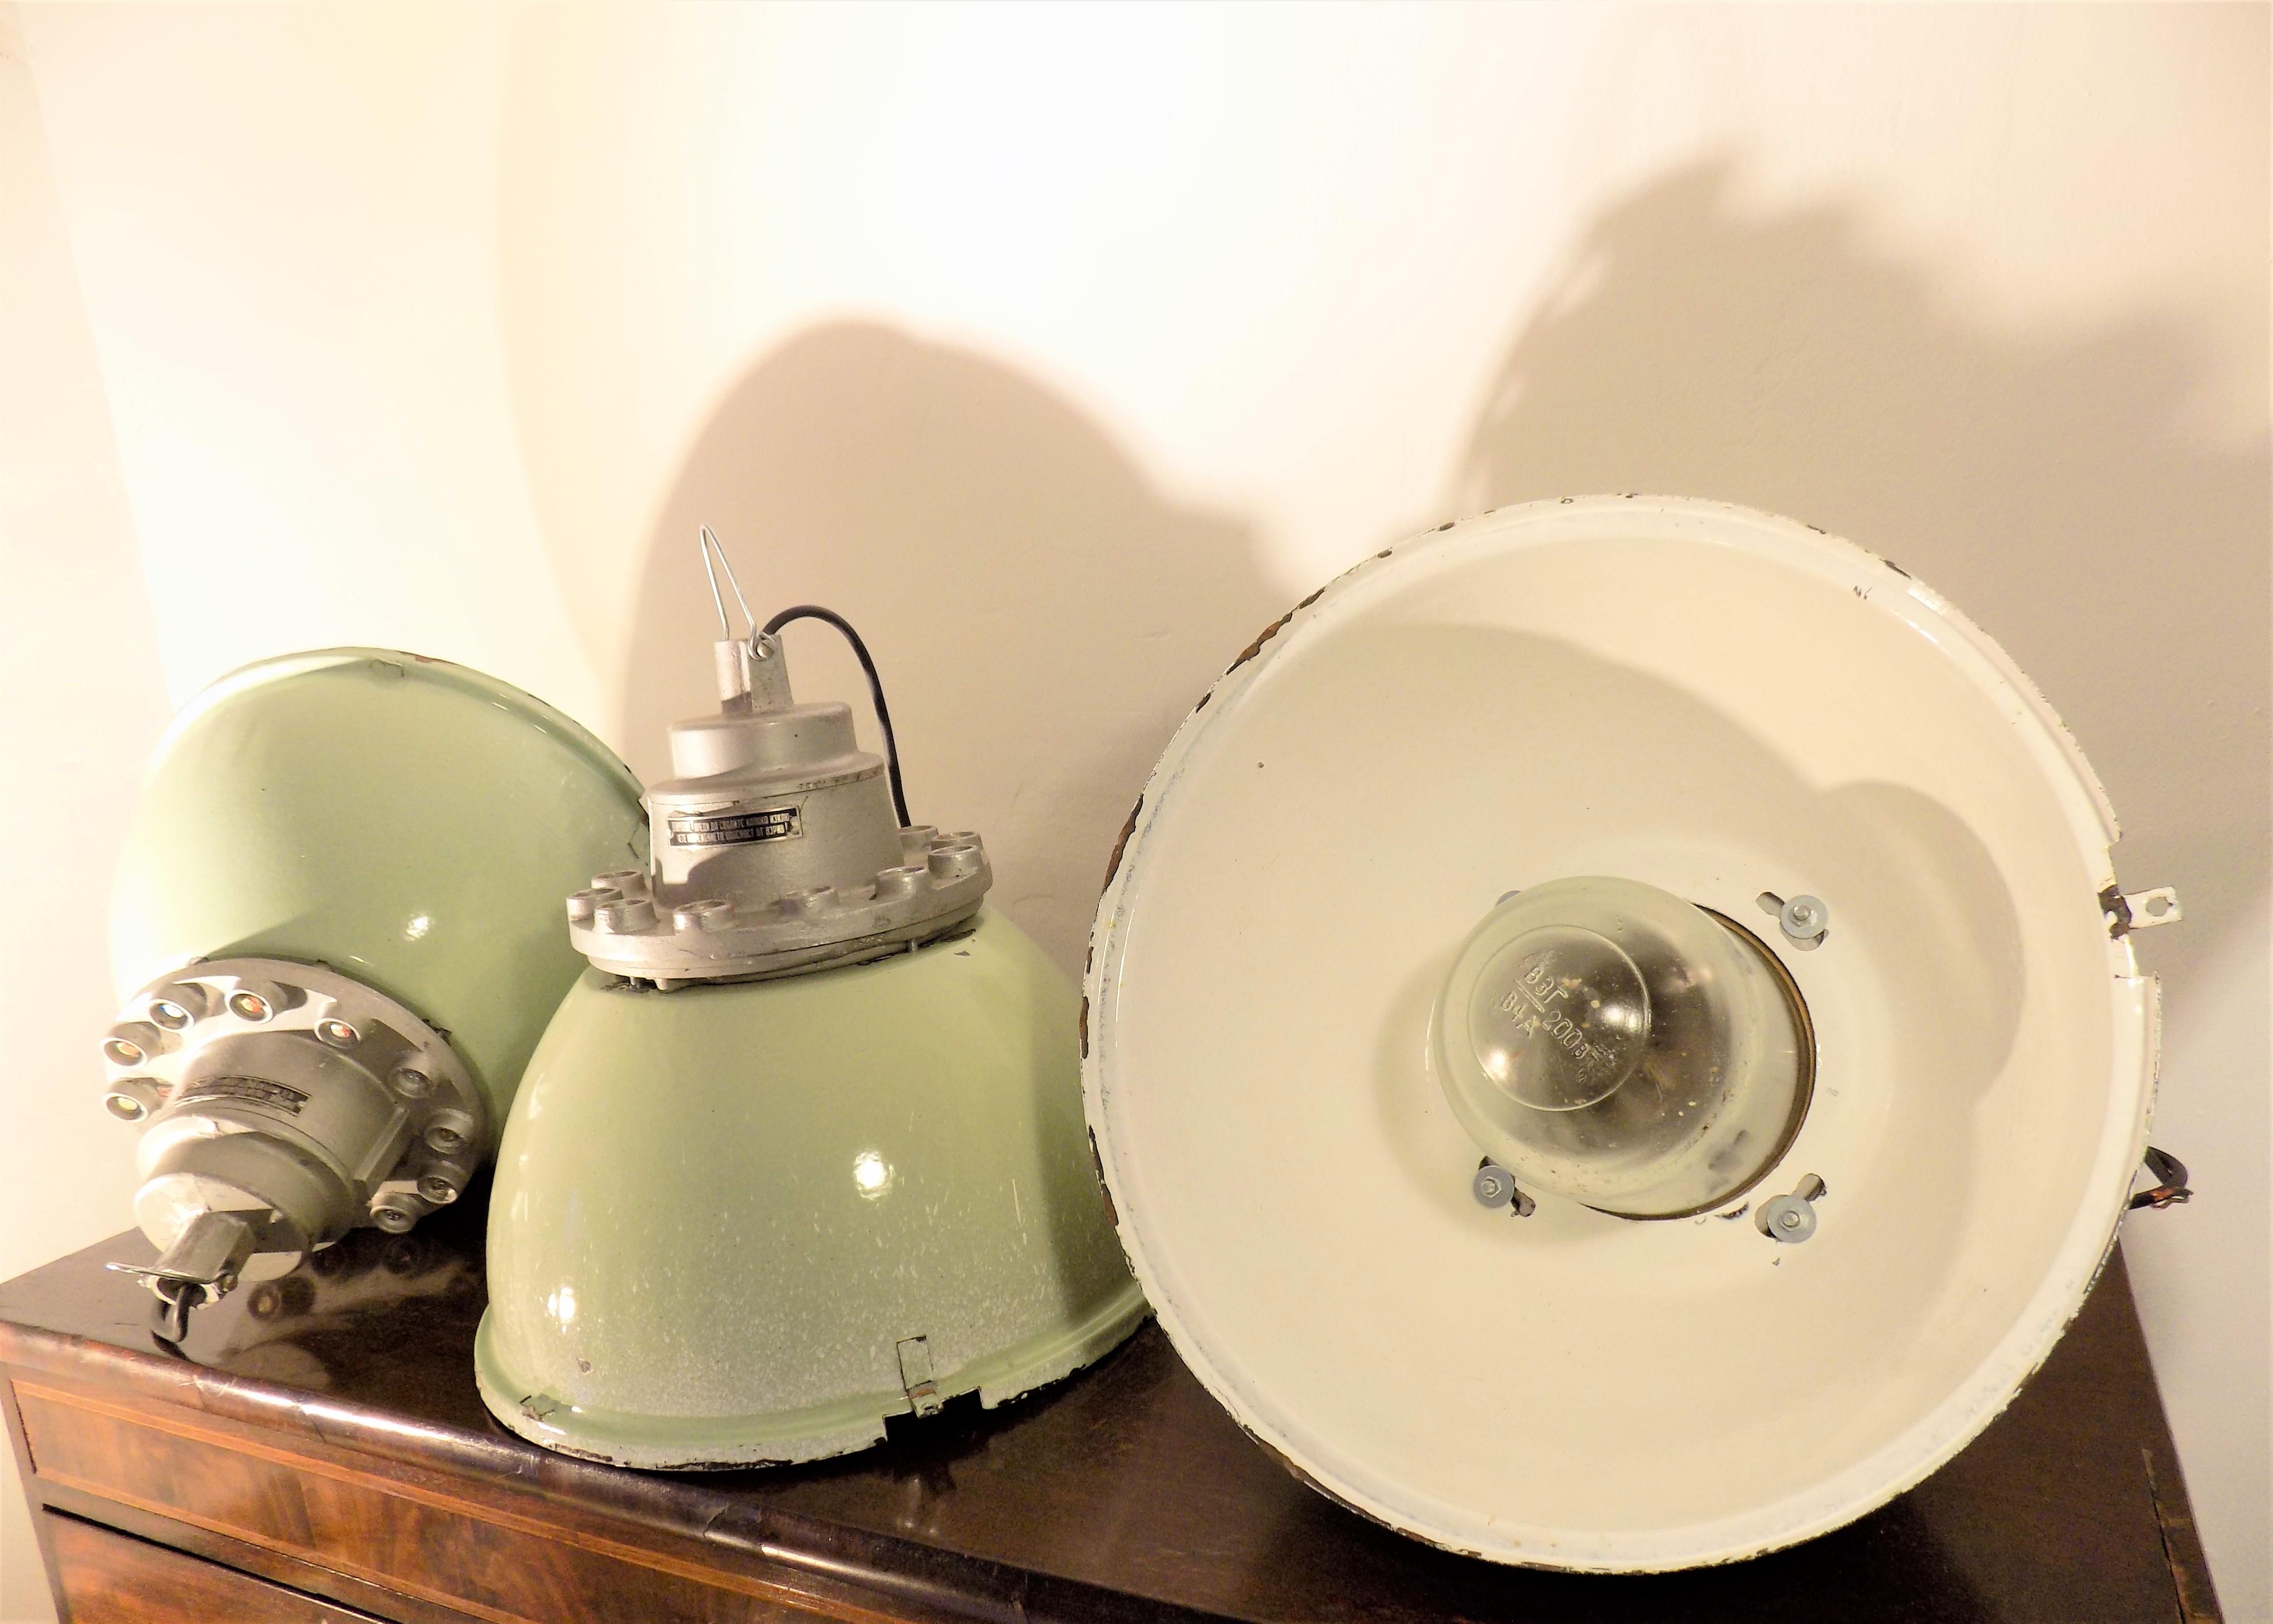 These factory lamps show fantastic patina on mint green finish. There are paint spatters and surface rust on the outside. Solid glass cylinders, all without damage.

The special feature of the lamps is a heavy metal crown which is screwed umpteen